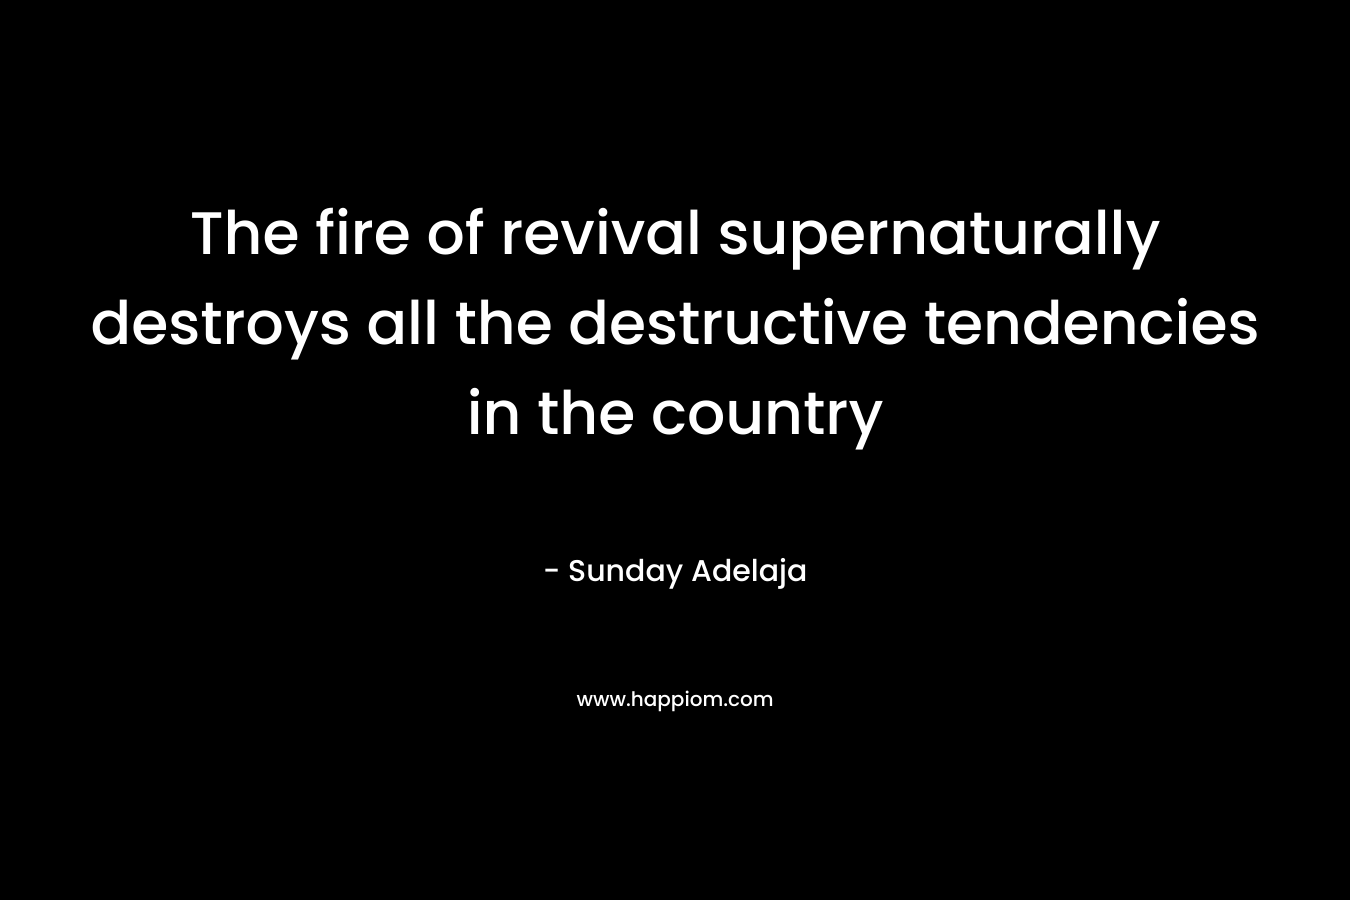 The fire of revival supernaturally destroys all the destructive tendencies in the country